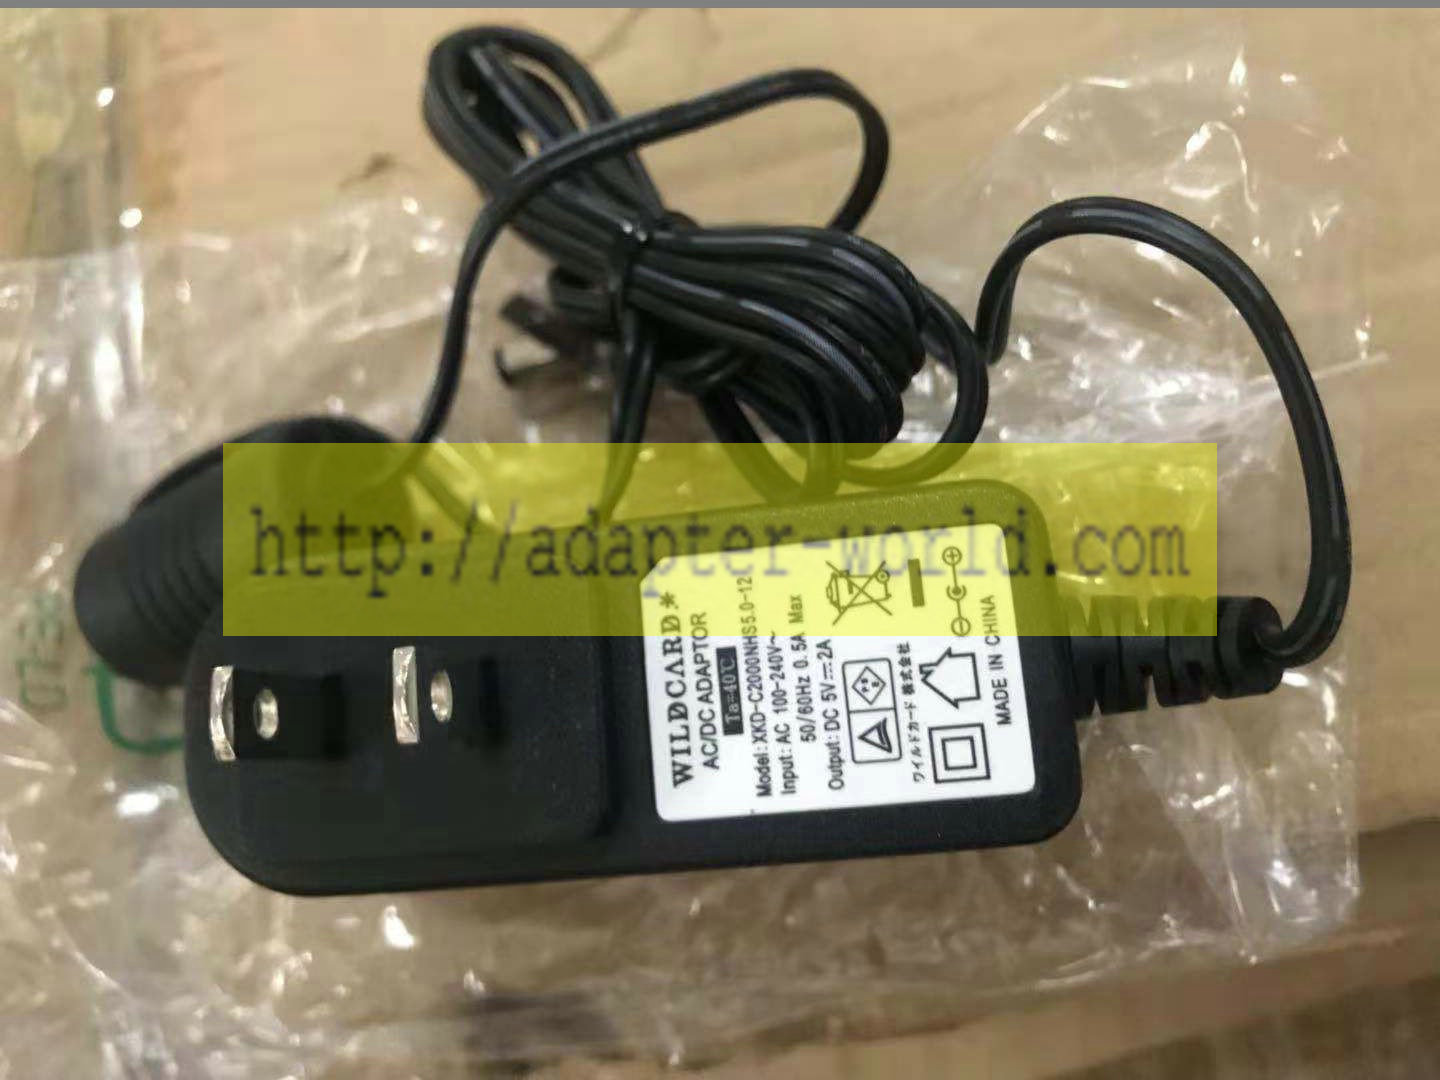 *Brand NEW* WILDCARD DC 5V 2A XKD-C2000NHS5.0-12 AC DC Adapter POWER SUPPLY